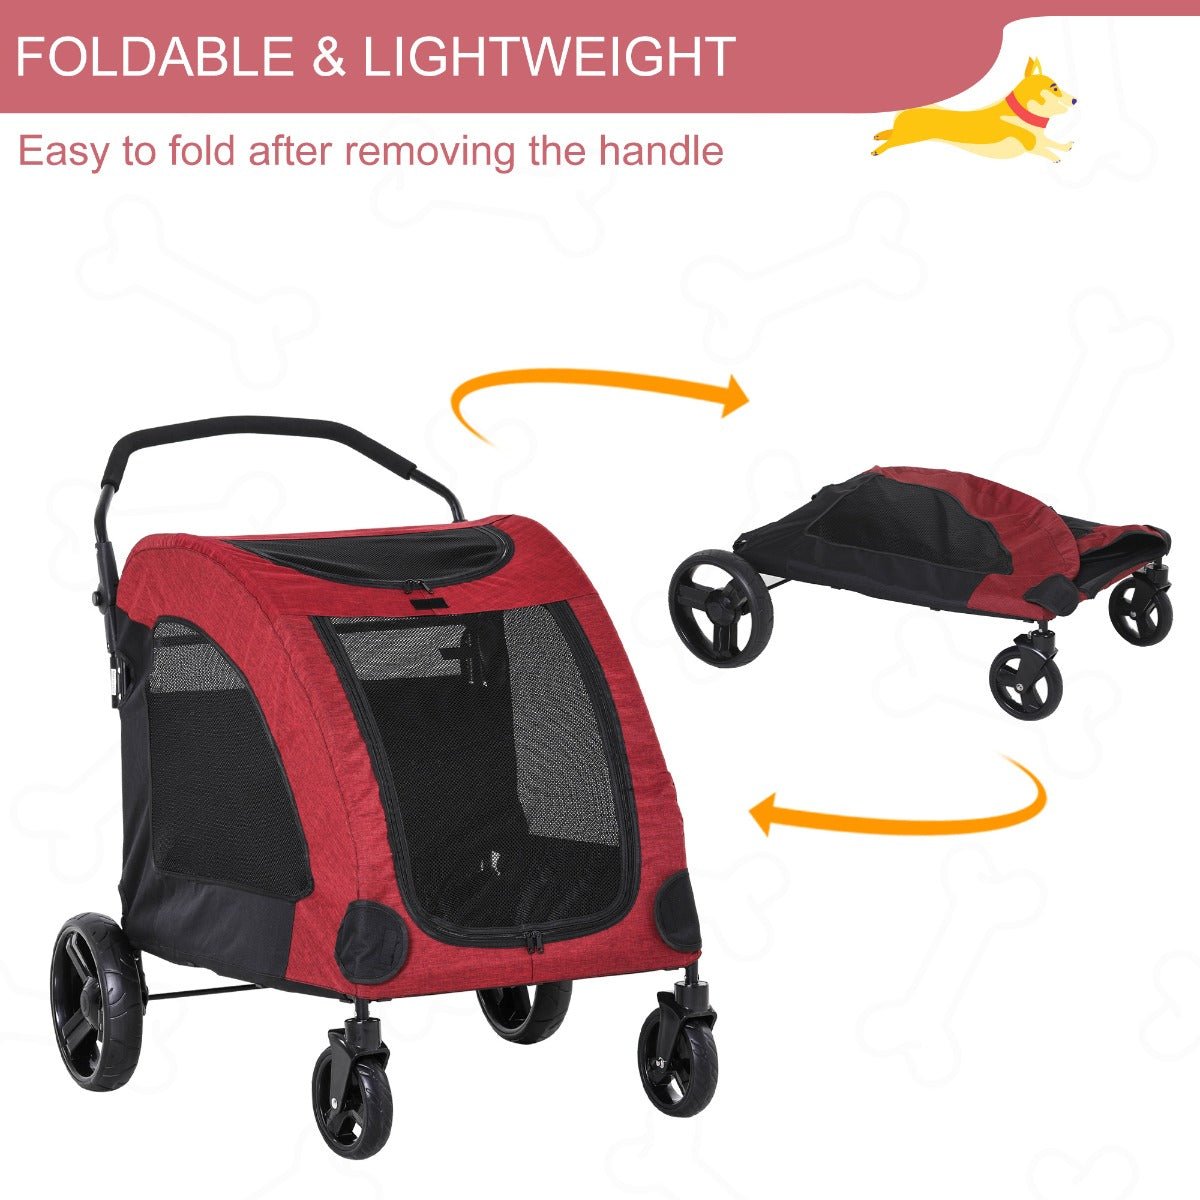 Pet Supplies-Foldable Pet Stroller for Medium Size Dogs with Storage Basket, Ventilated Oxford Fabric, Universal Wheel, Red - Outdoor Style Company